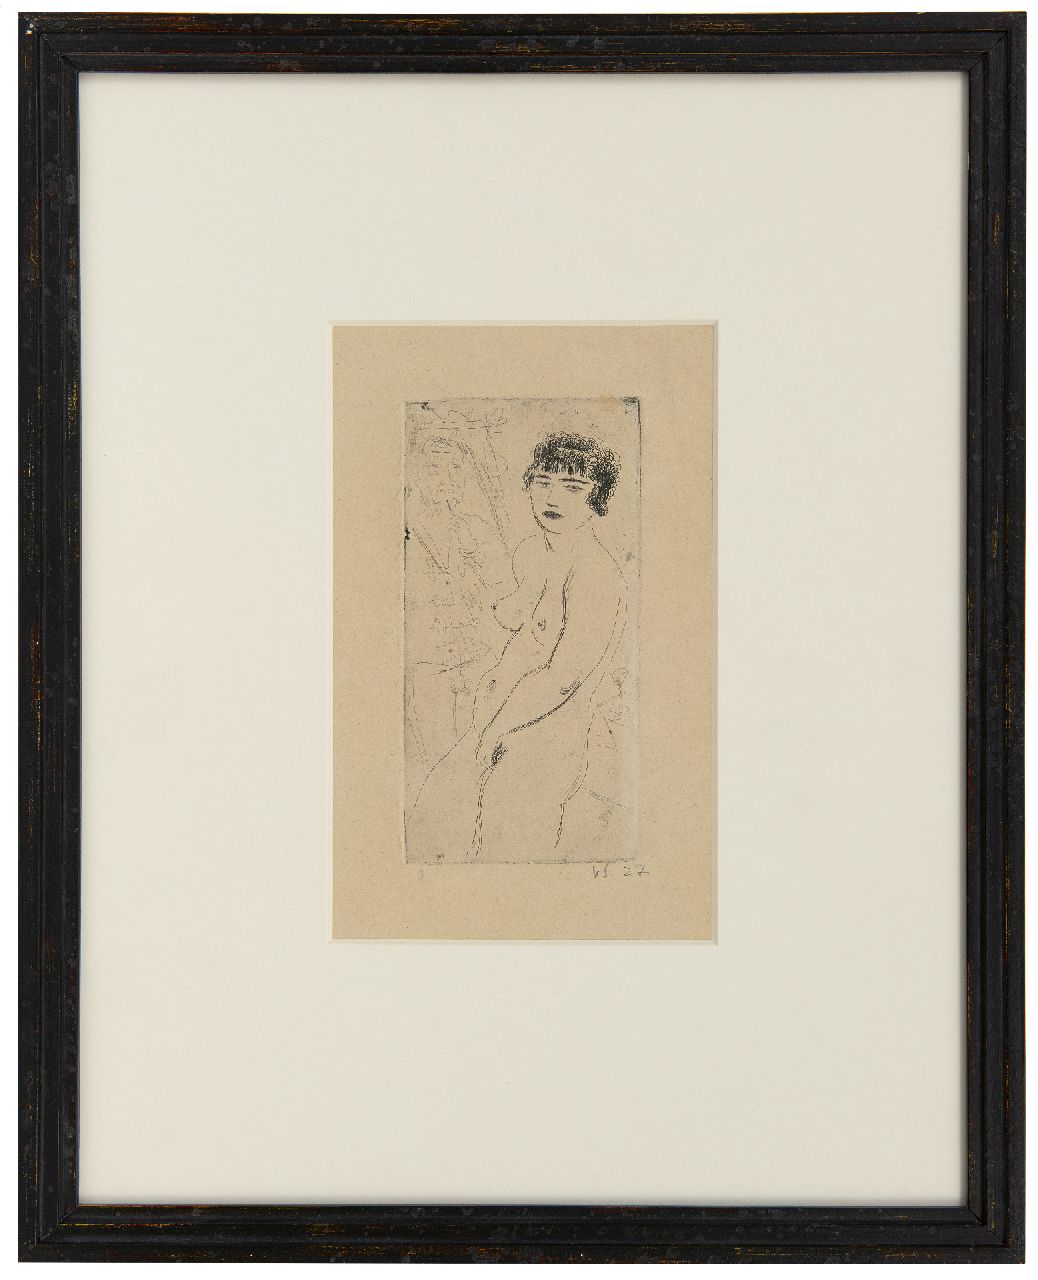 Sychra V.  | Vladimir Sychra | Prints and Multiples offered for sale | Female nude, etching on paper 14.7 x 7.3 cm, signed l.r. in pencil 'v.s.' and dated '27